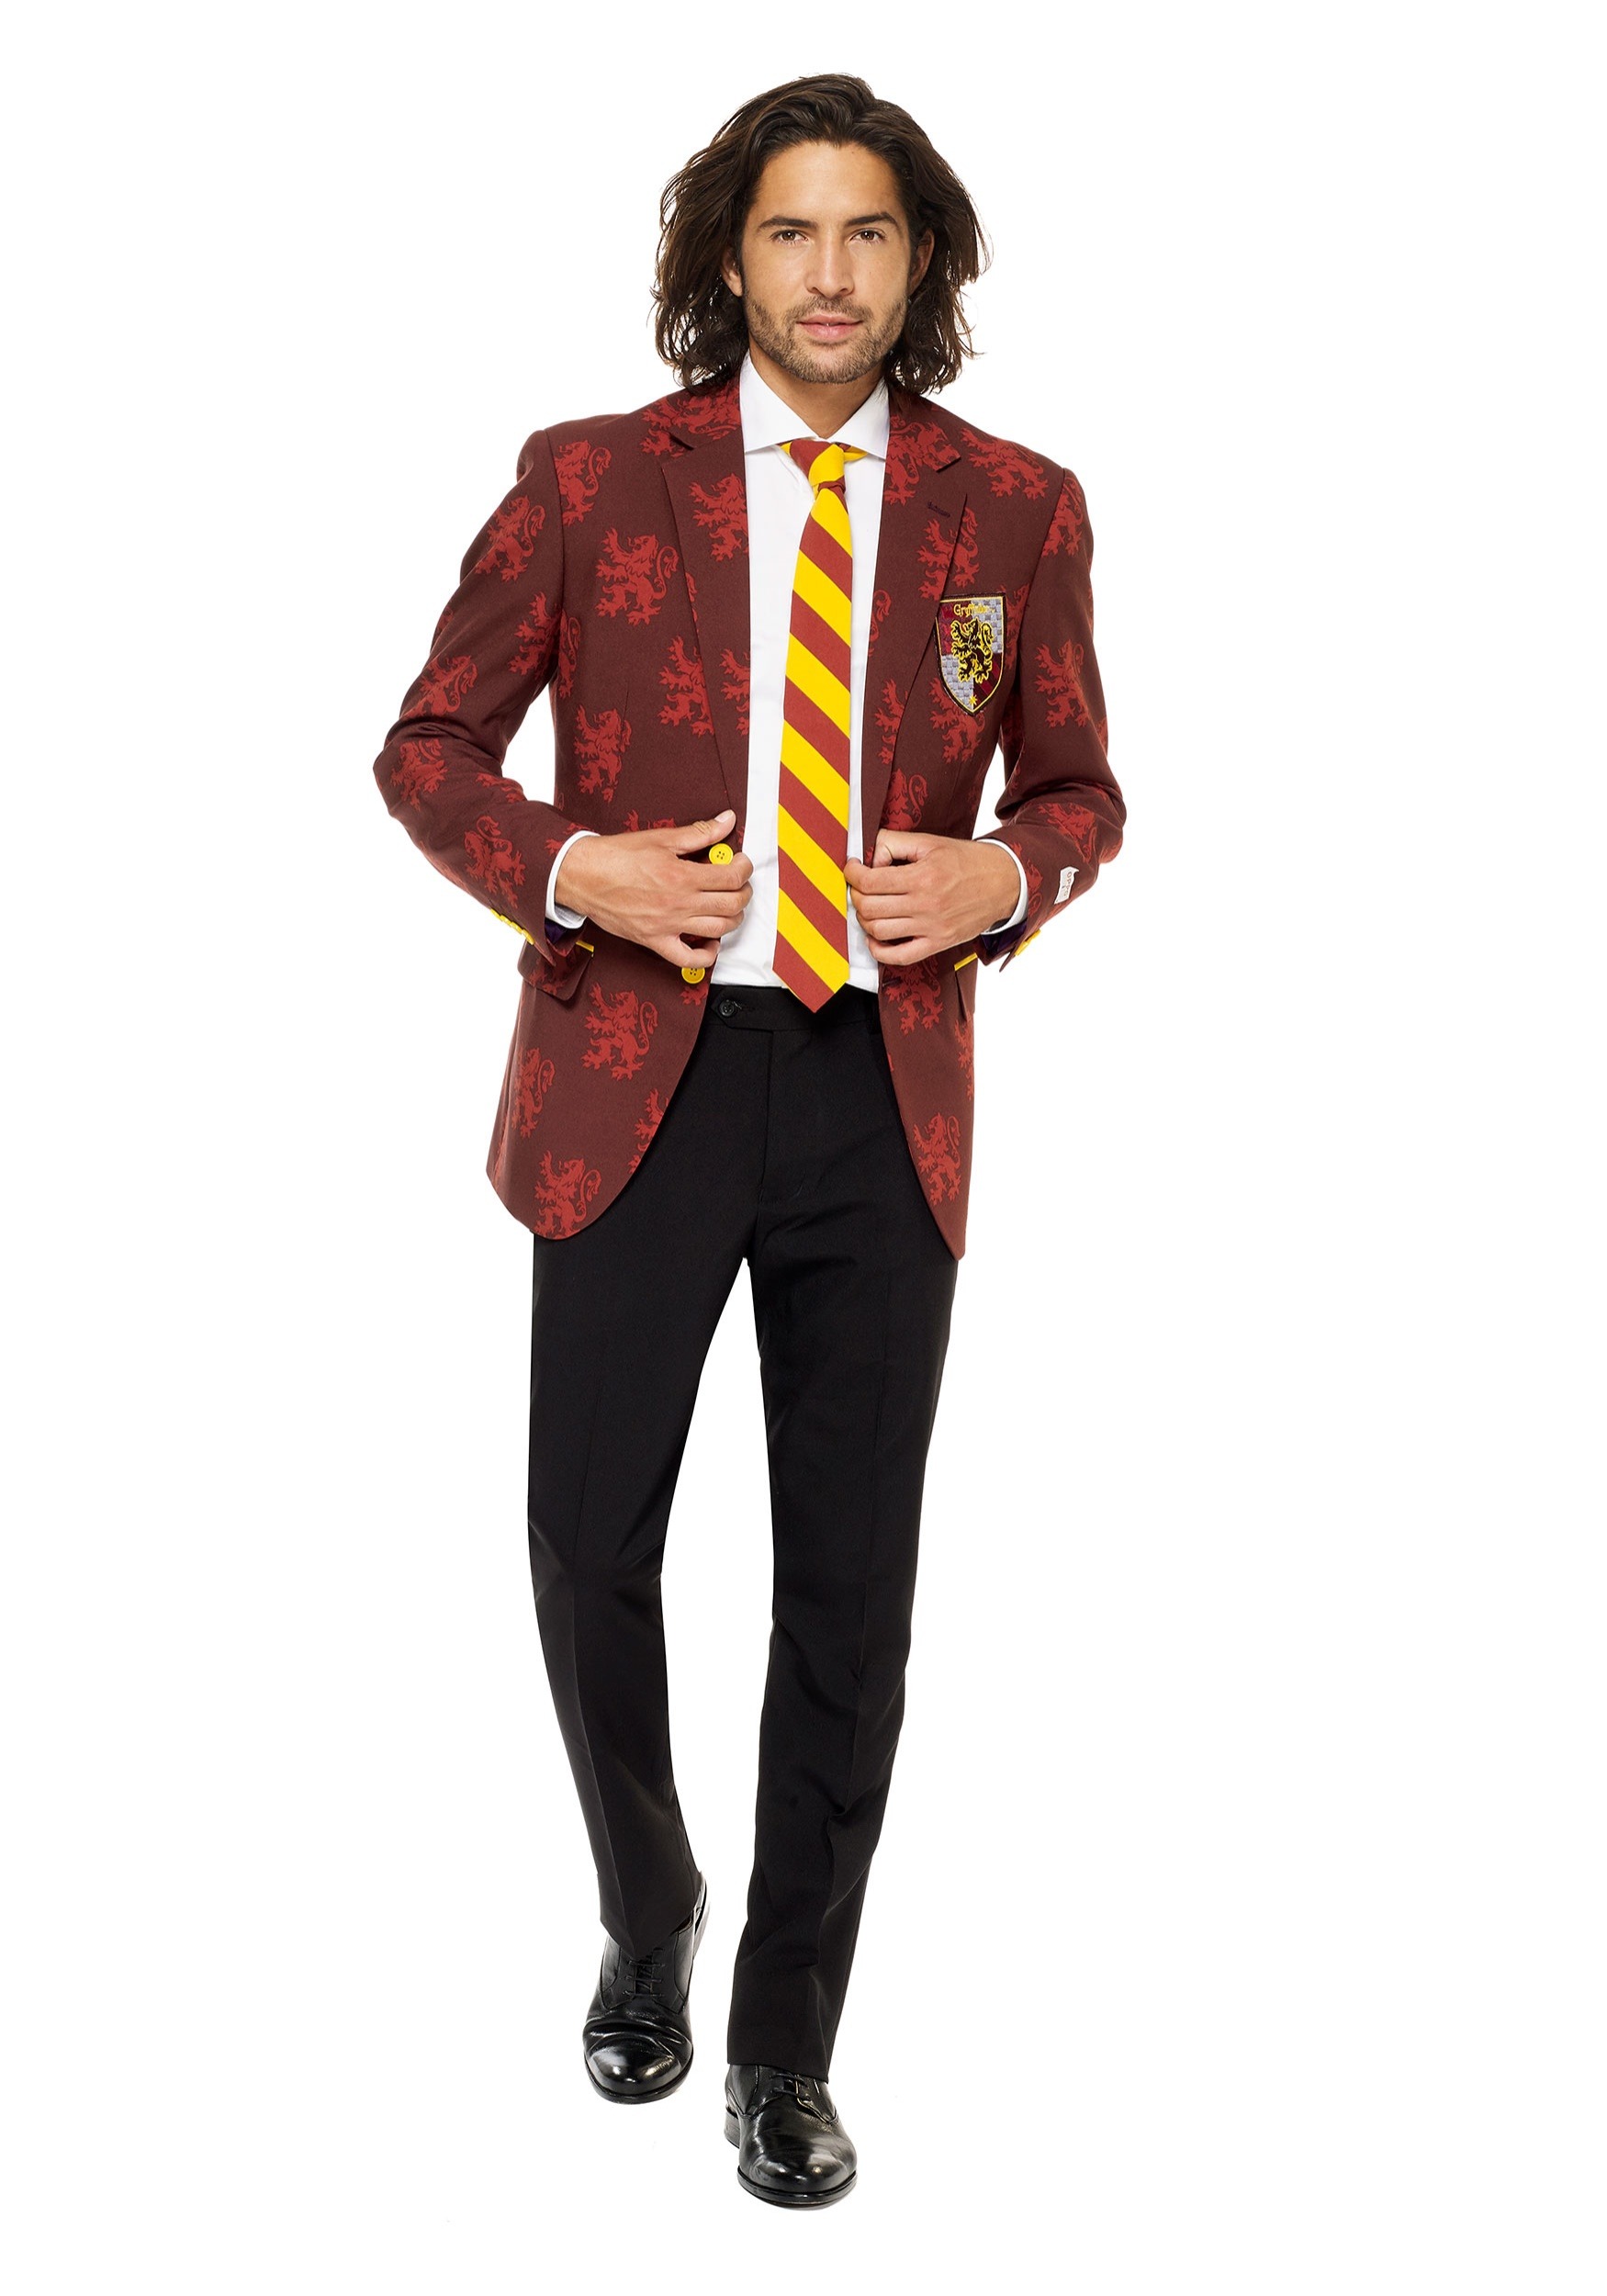 Image of Opposuits Harry Potter Men's Suit Costume ID OSOSUI0080-46